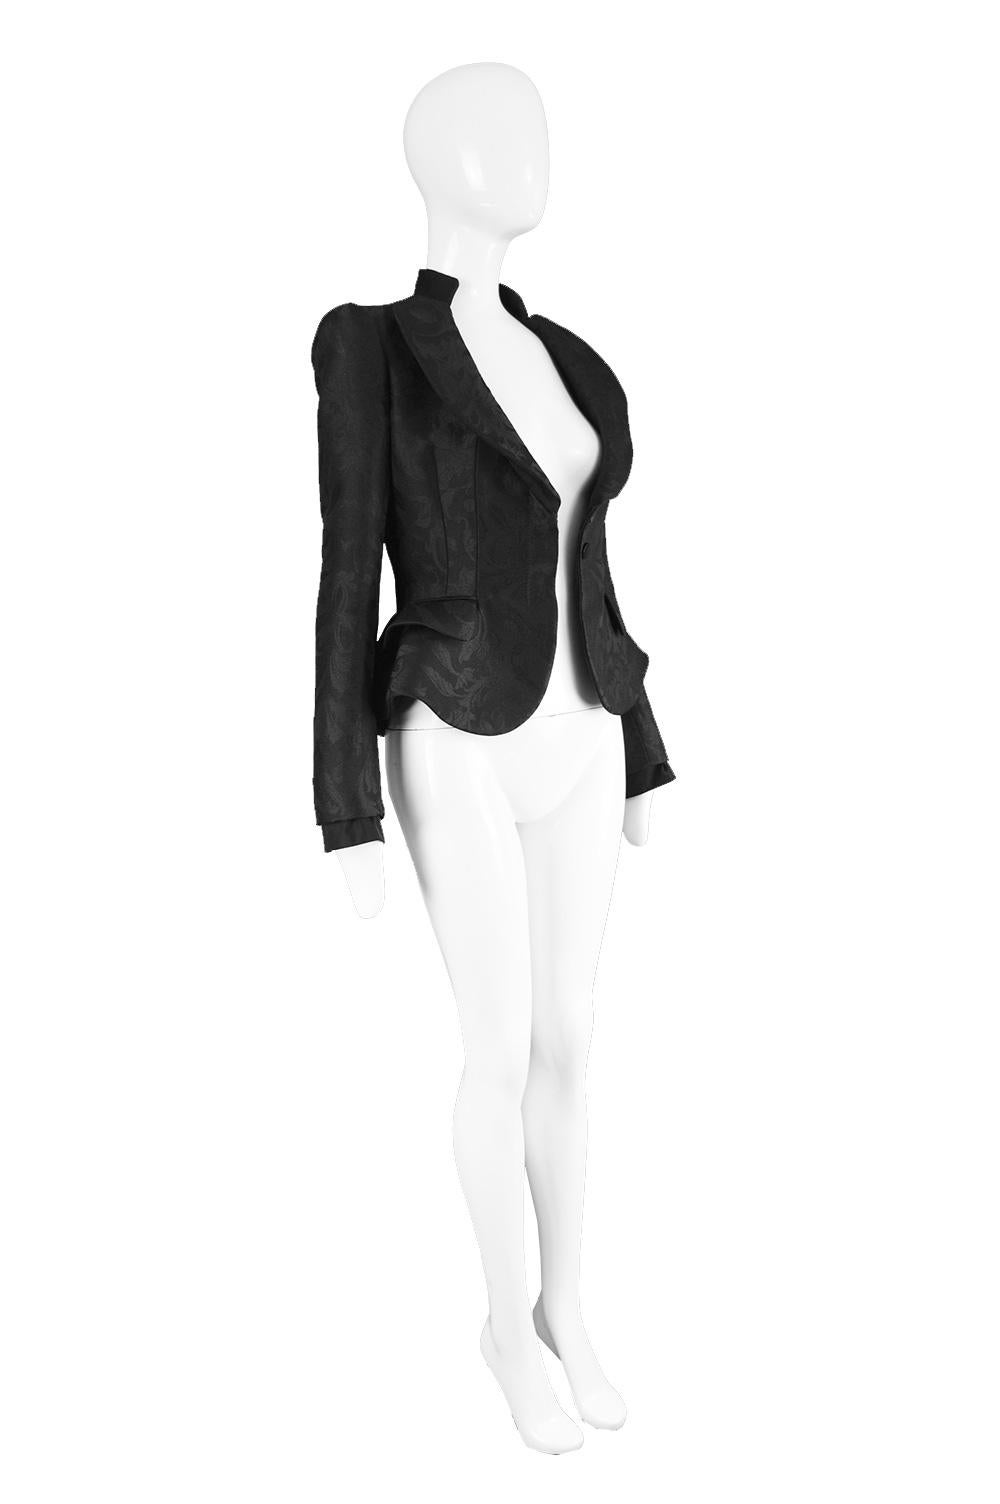 Alexander McQueen Nipped Waist Black Damask Architectural Peplum Jacket, 2012 In Excellent Condition In Doncaster, South Yorkshire